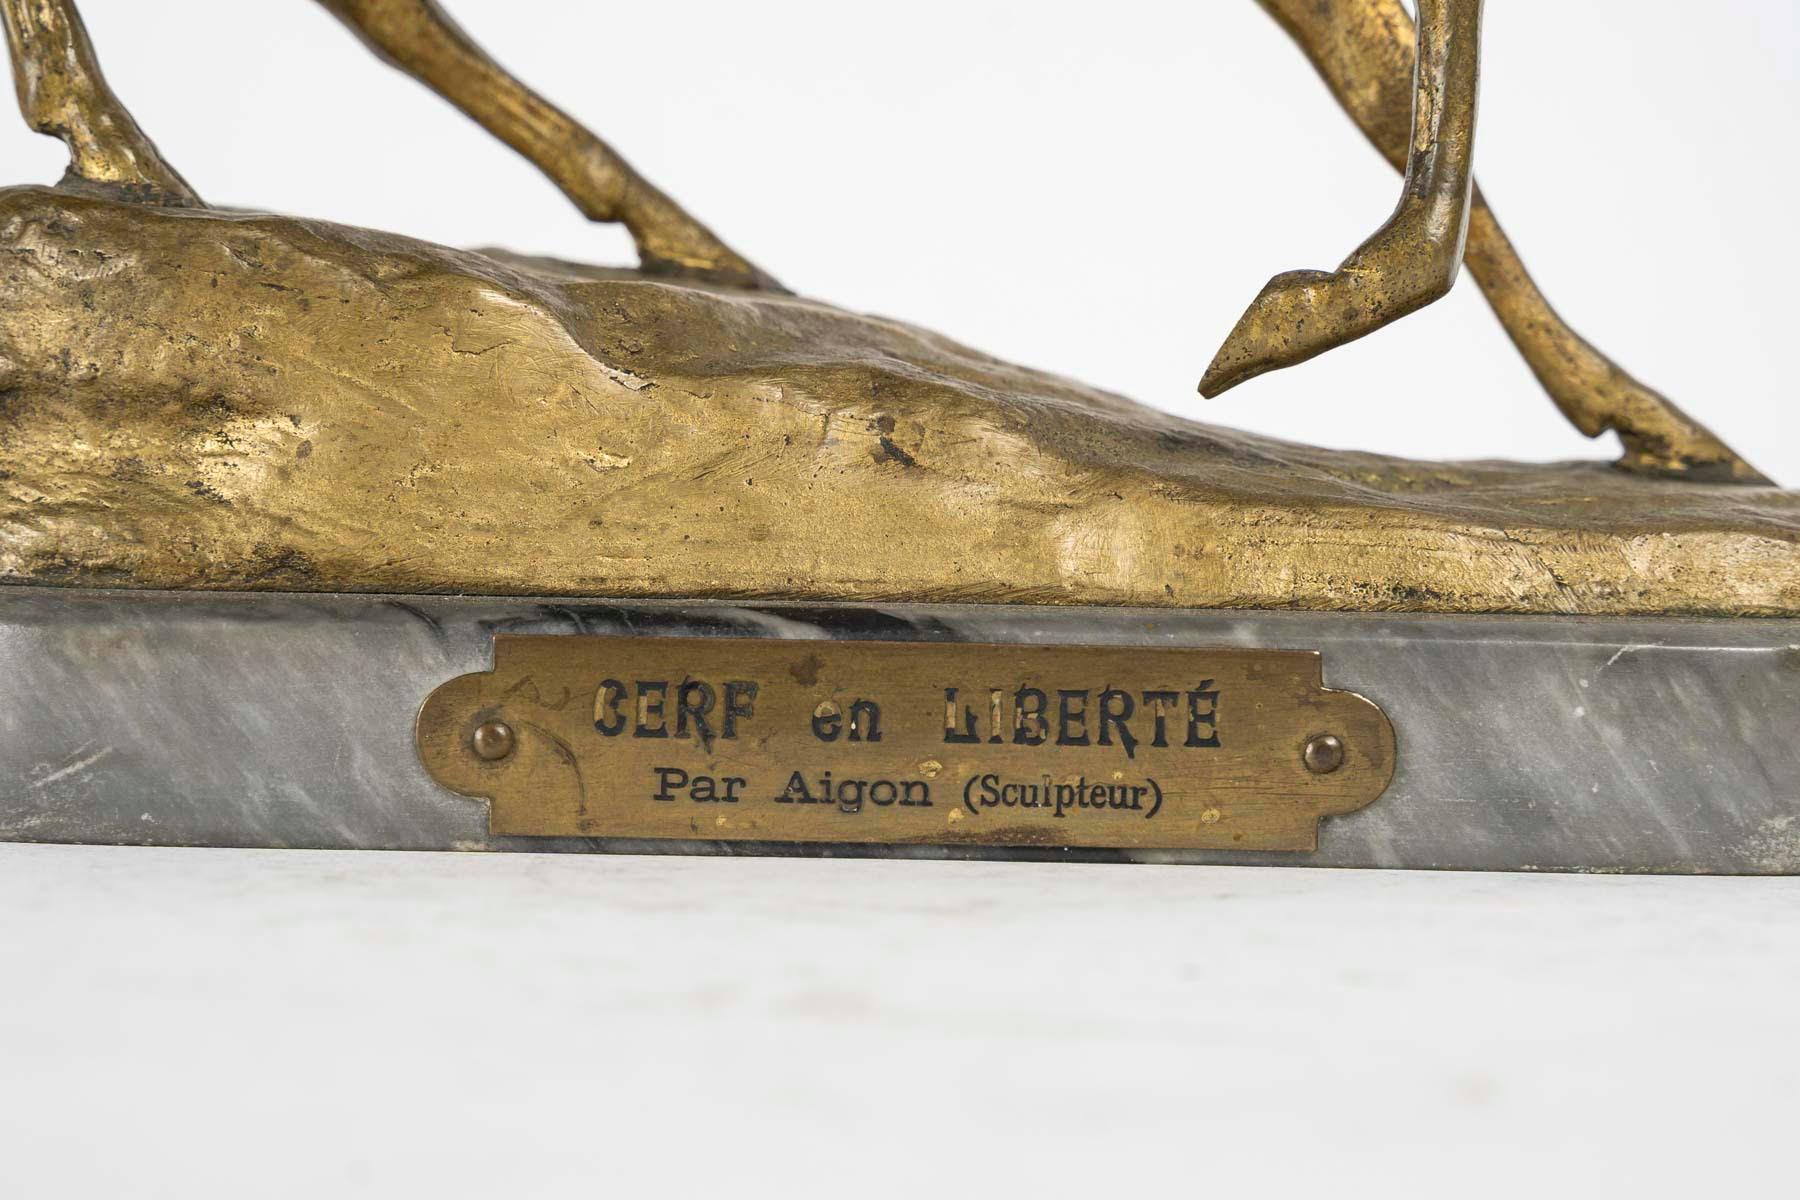 Gilt Sculpture of a Stag in Freedom by Aignon, Sculptor, Napoleon III Period. For Sale